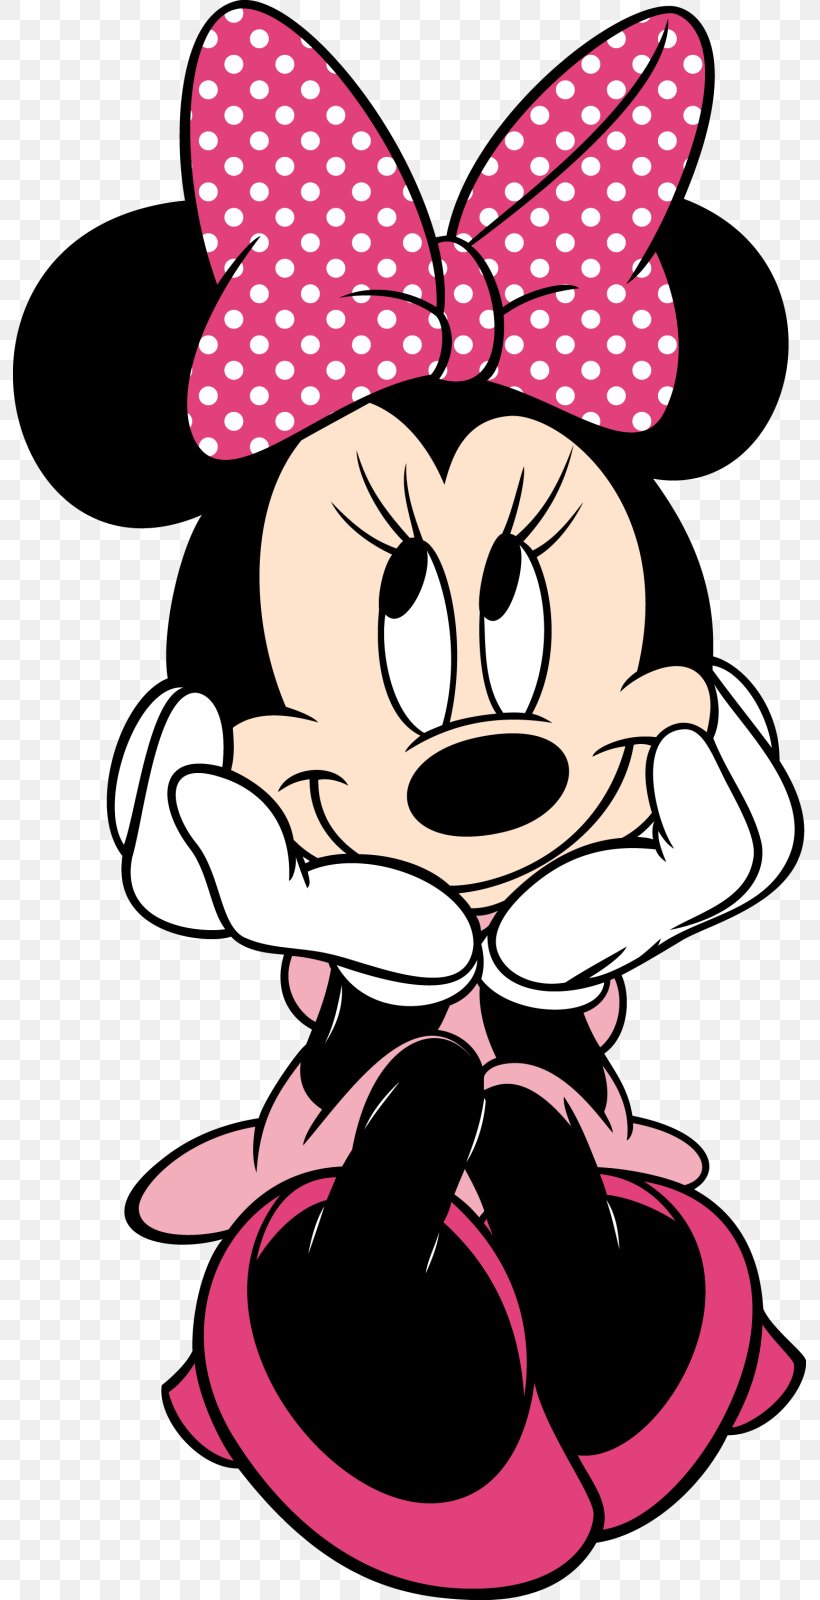 Minnie Mouse Mickey Mouse Clip Art, PNG, 793x1600px.